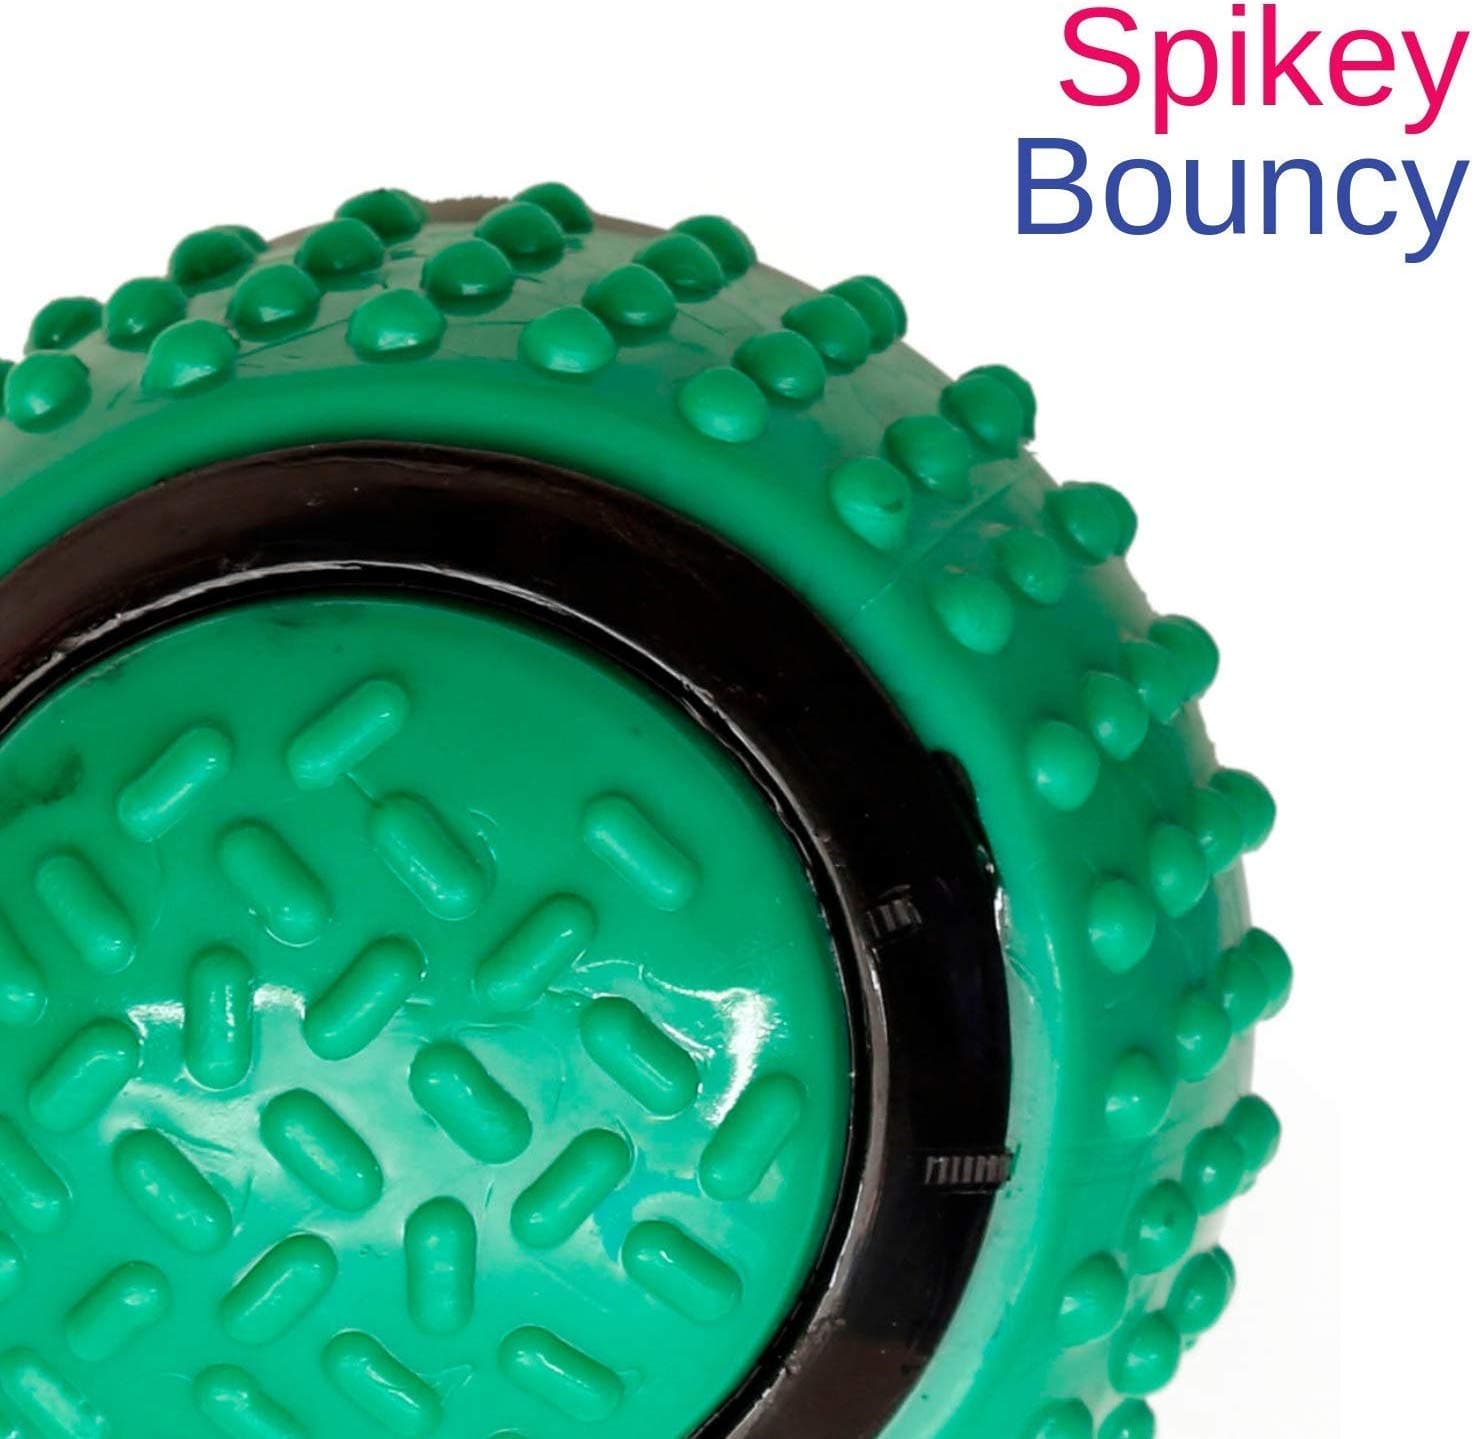 Green Spikey and bouncy Rubber Durable Dog Ball (7168221282454)